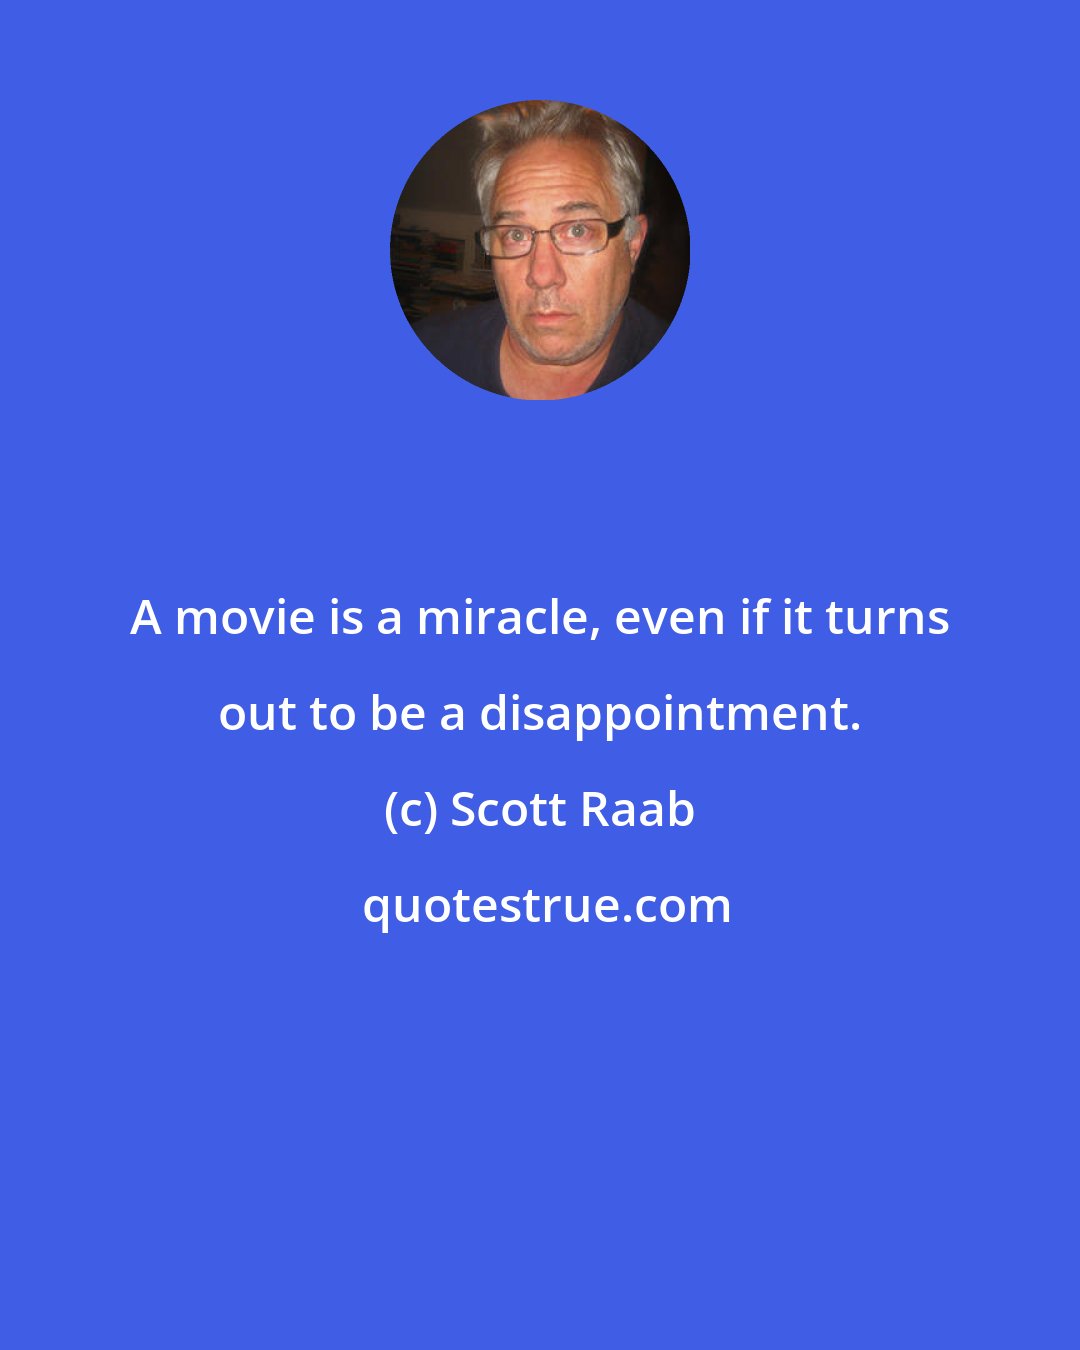 Scott Raab: A movie is a miracle, even if it turns out to be a disappointment.